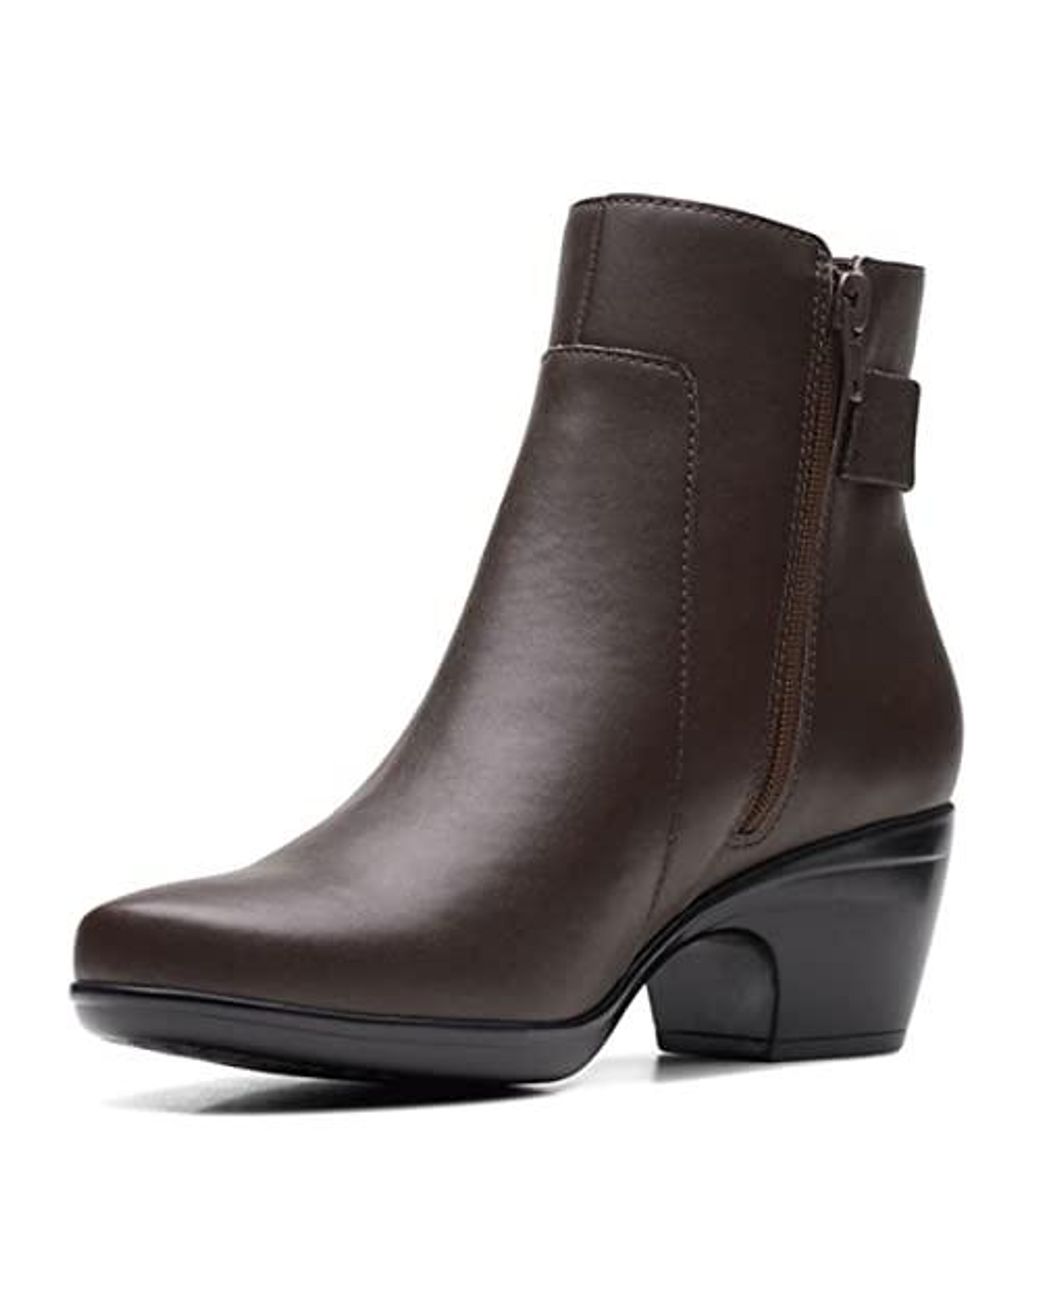 Clarks Emily Holly Ankle Boots in Black | Lyst UK